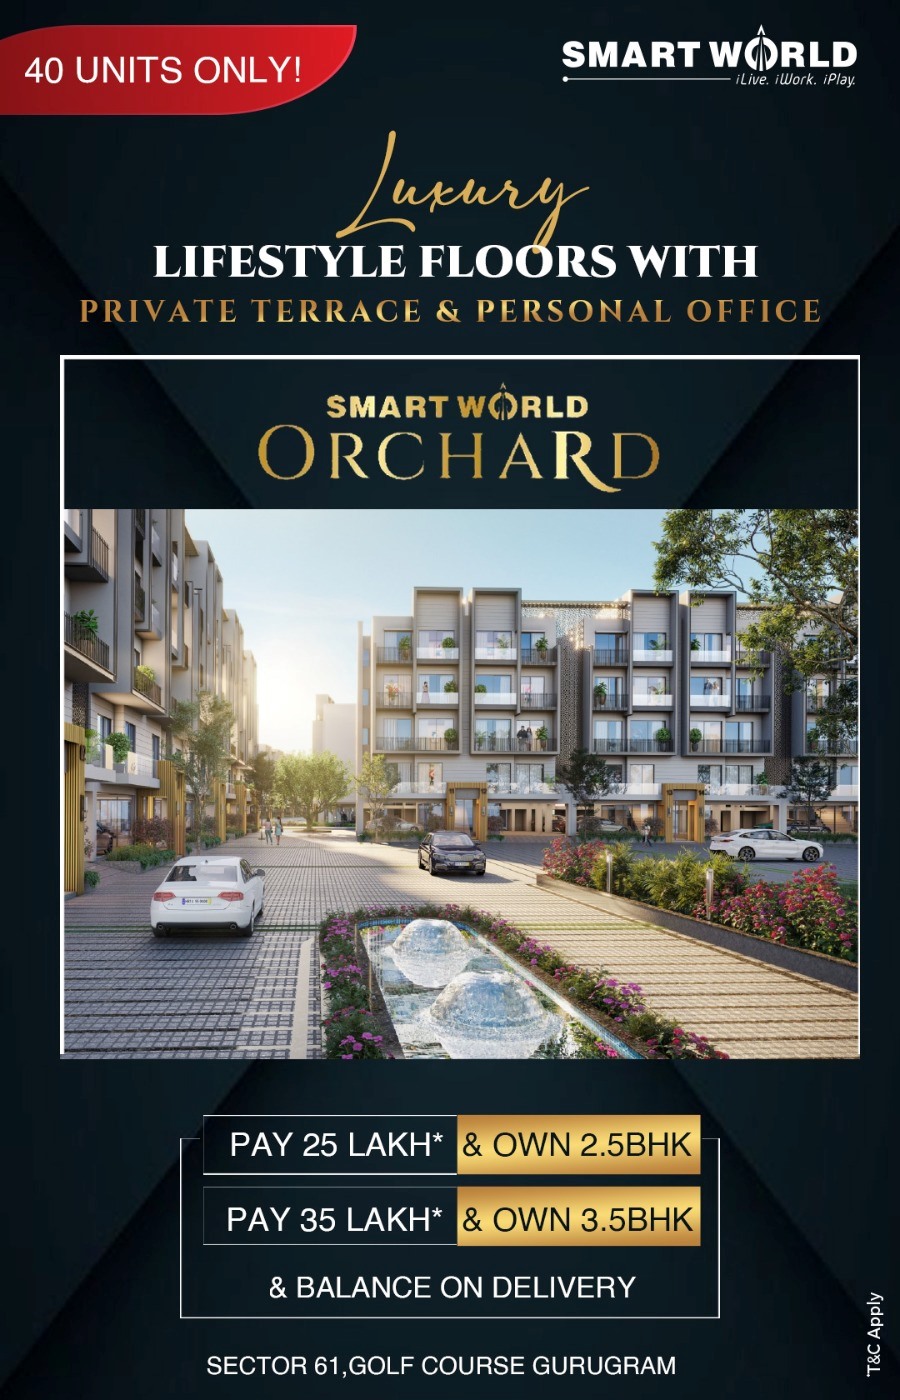 Only 40 units left at Smart World Orchard, Gurgaon Update